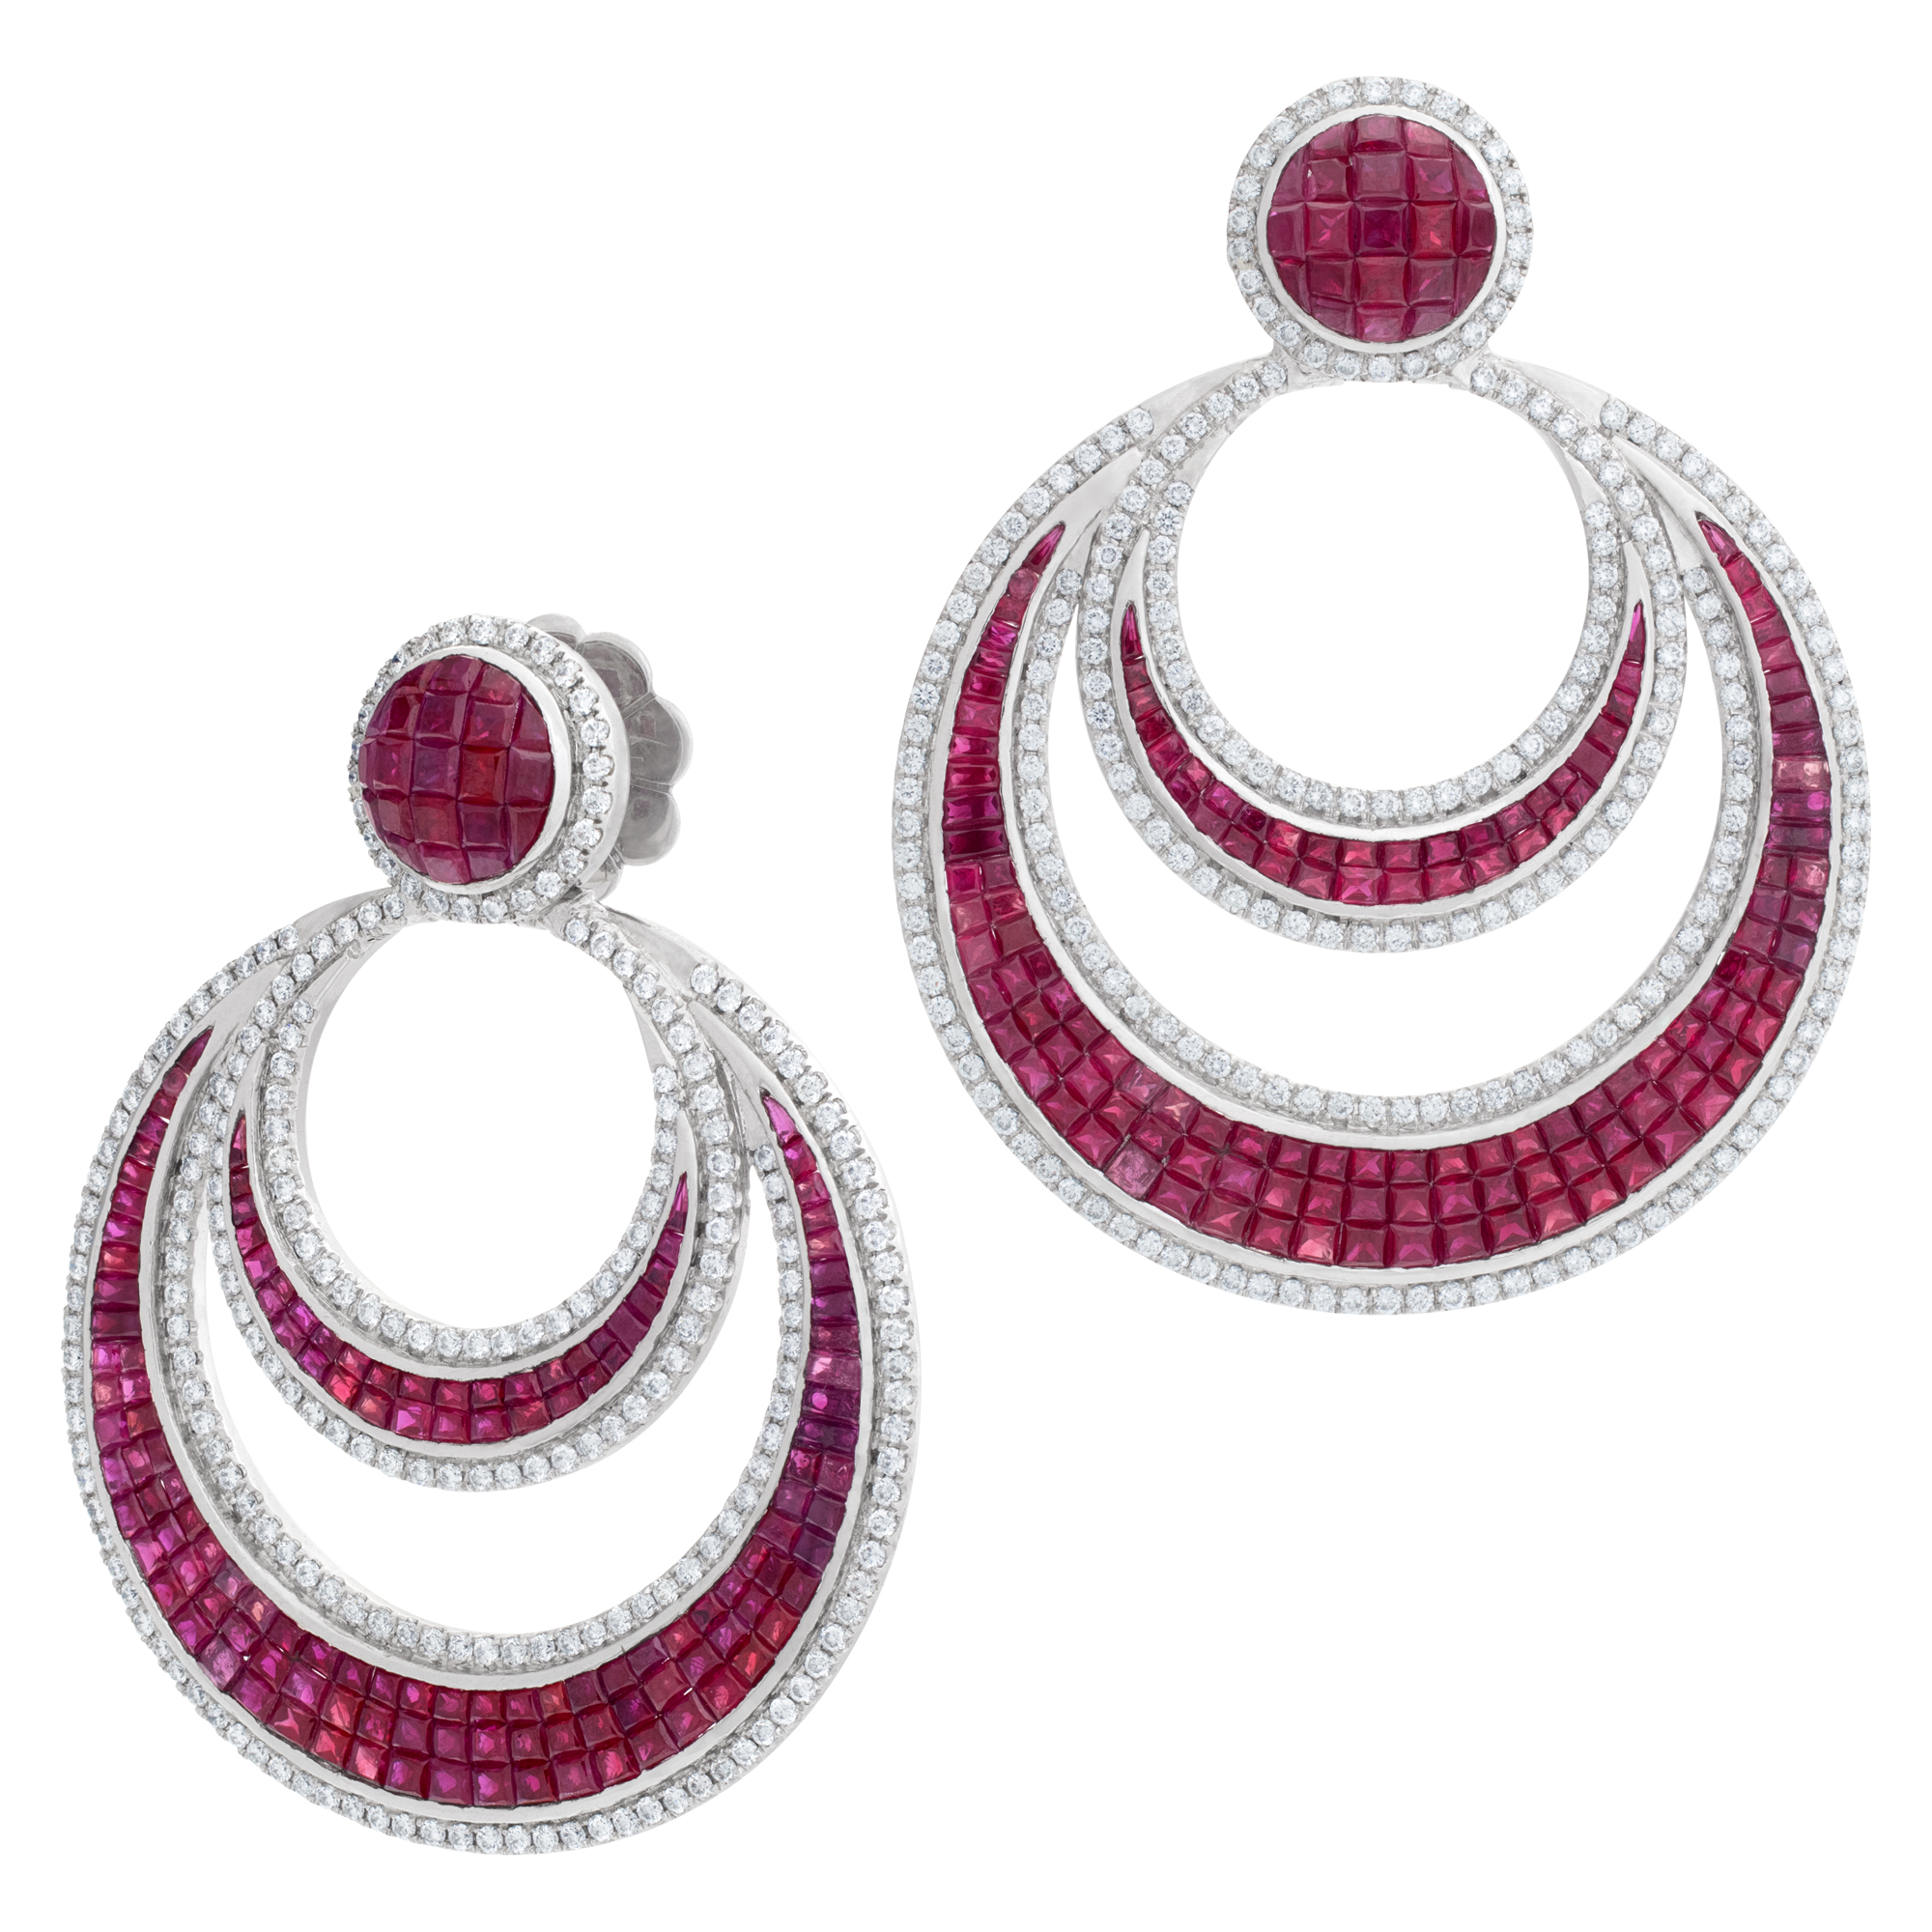 Rubies and diamonds circle earrings in 18k white gold (Stones)